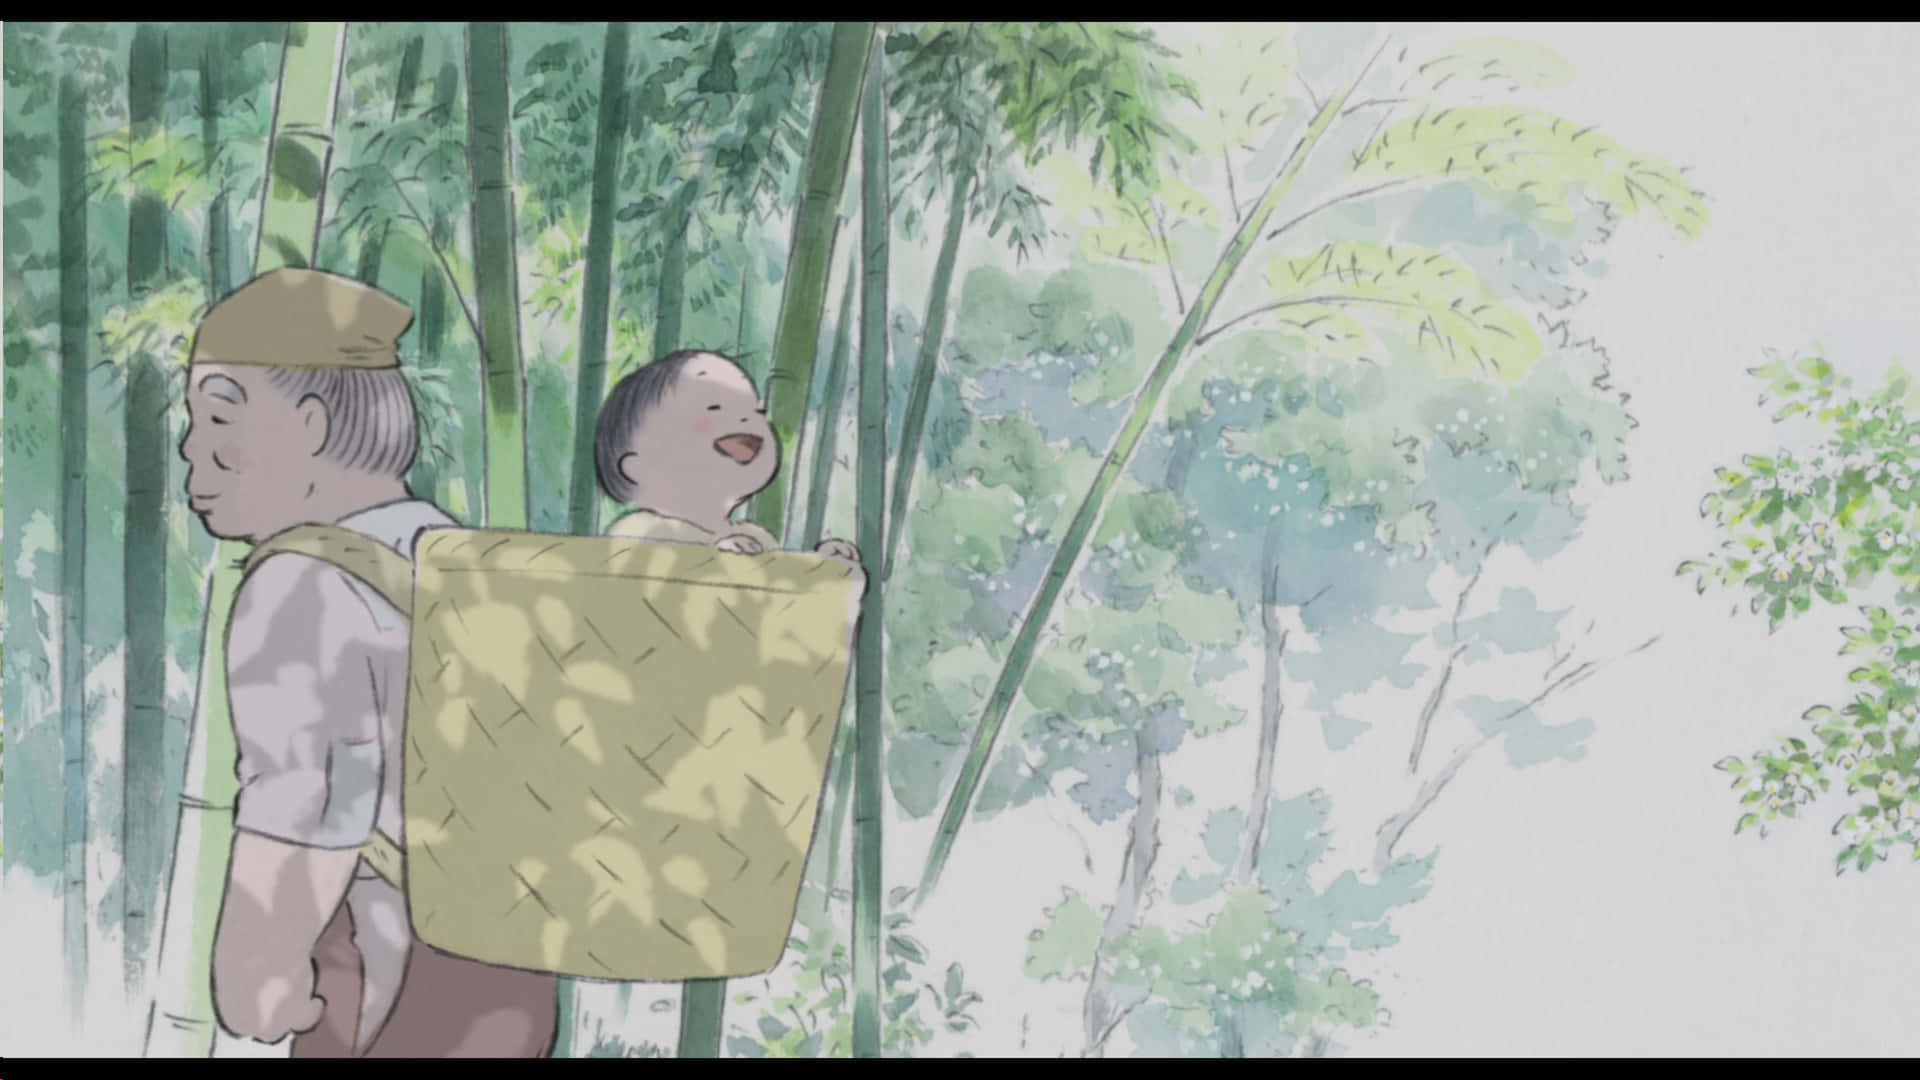 The Tale of The Princess Kaguya - Heartwarming scene from the film Wallpaper